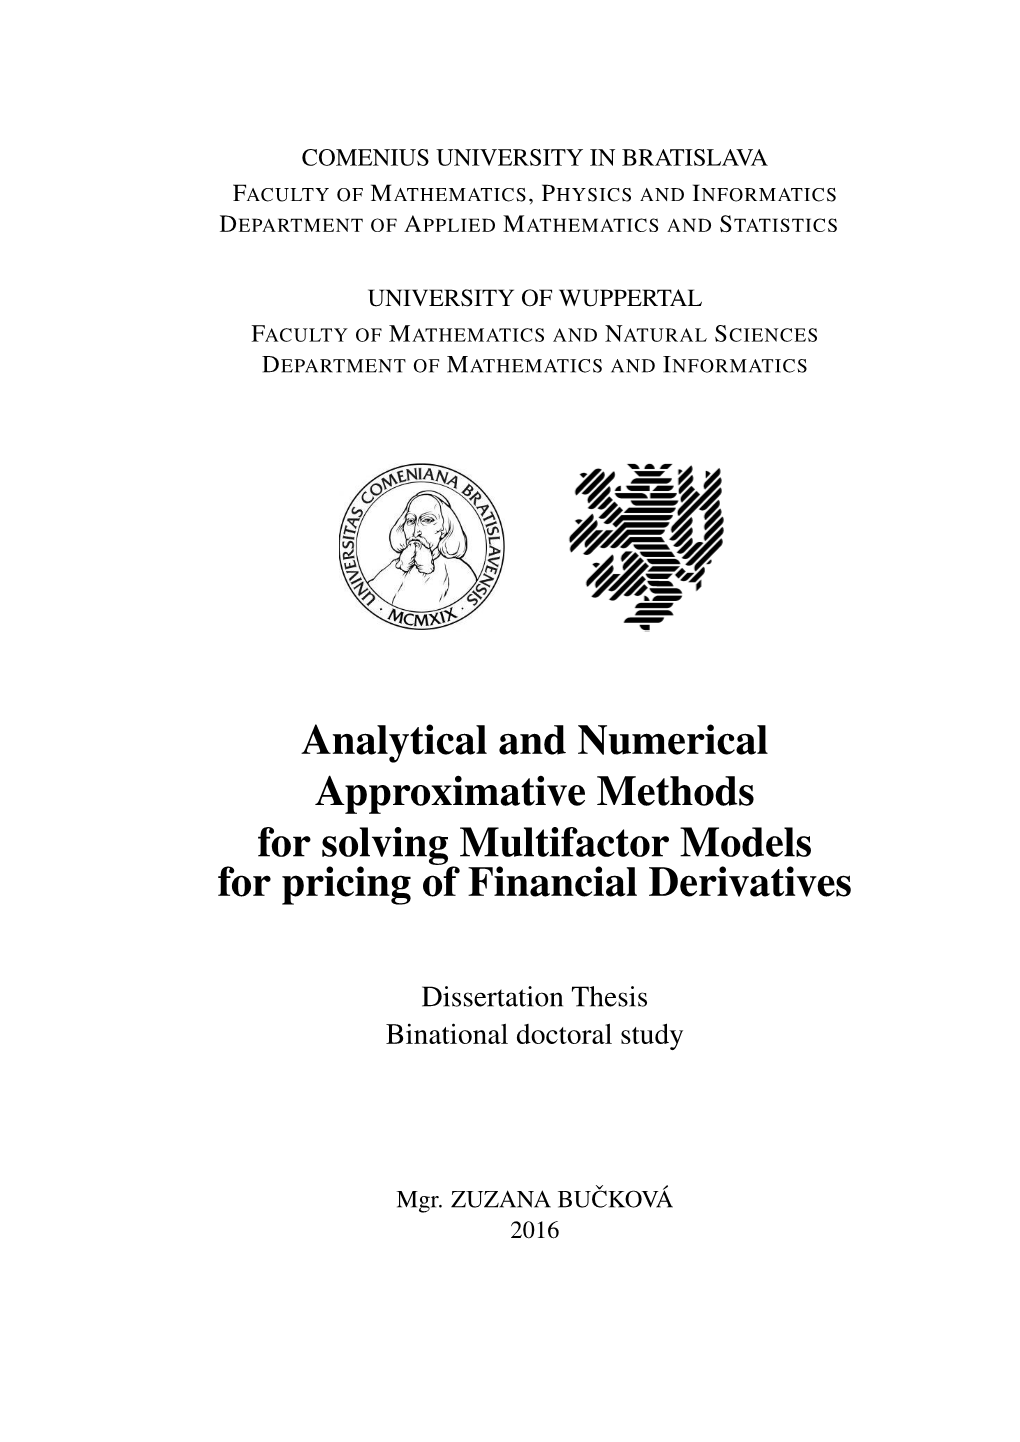 Analytical and Numerical Approximative Methods for Solving Multifactor Models for Pricing of Financial Derivatives